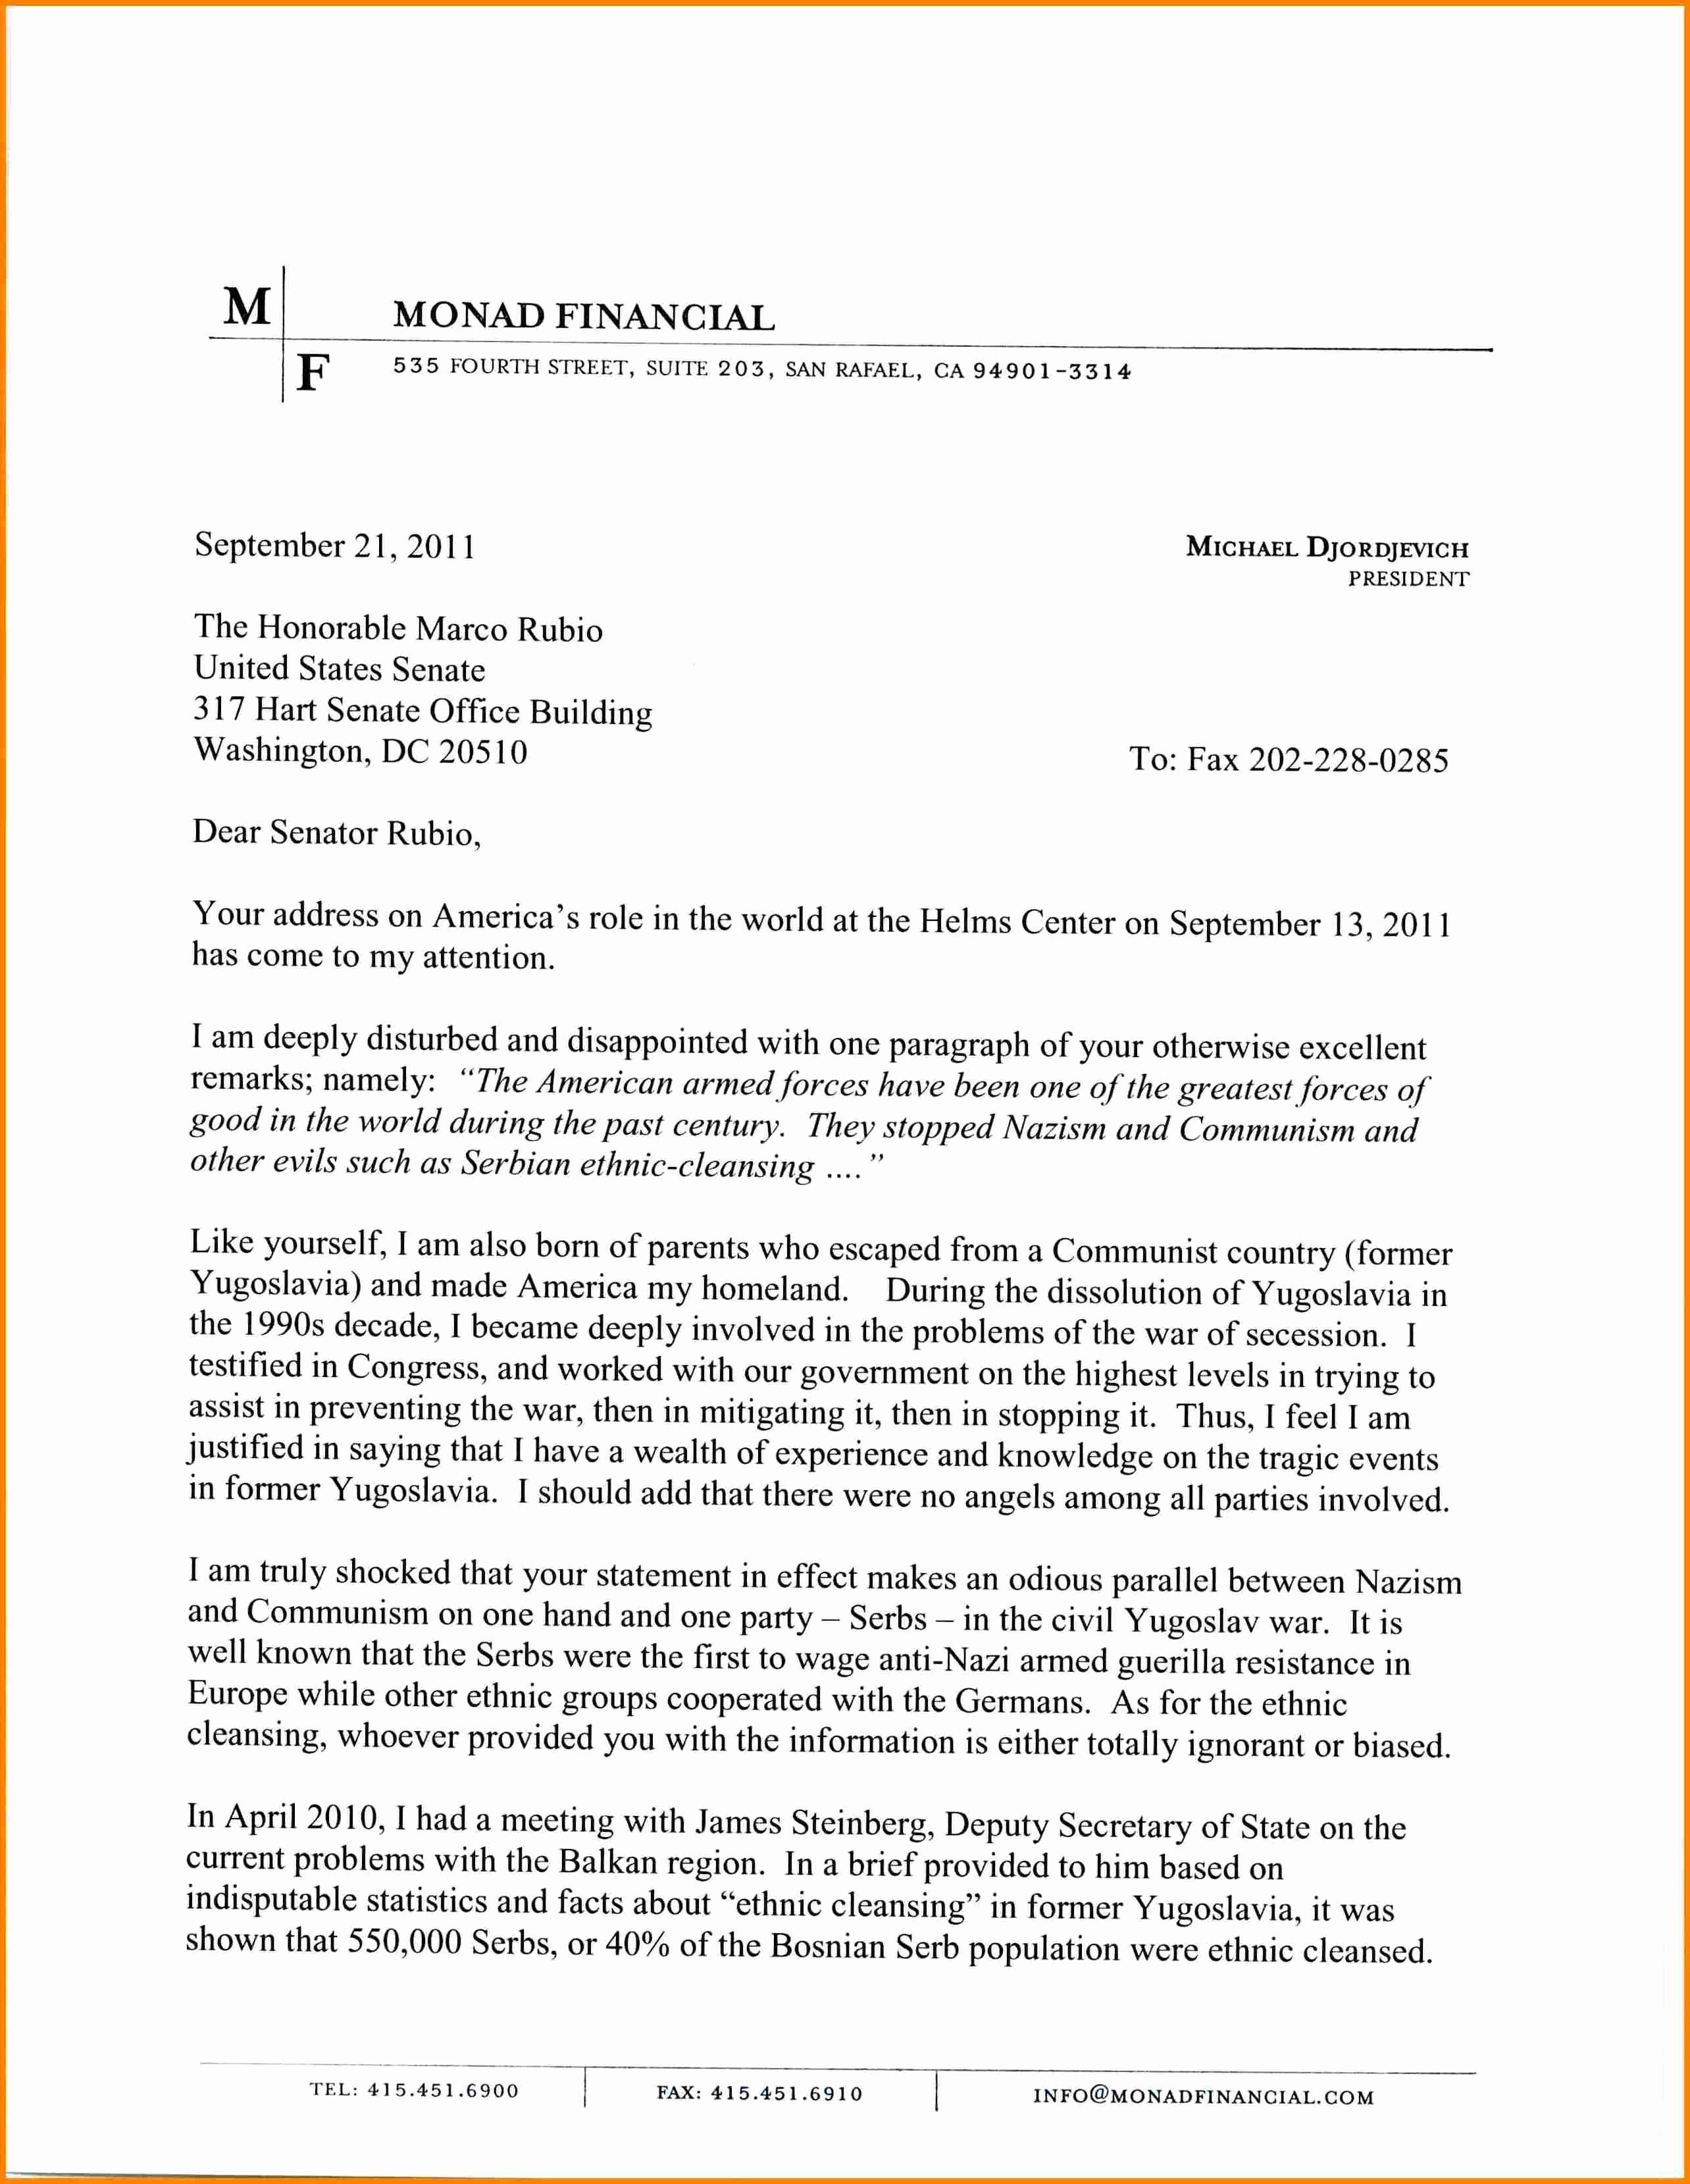 College Appeal Letter format Inspirational 5 Academic Appeal Letter for Financial Aid Sample